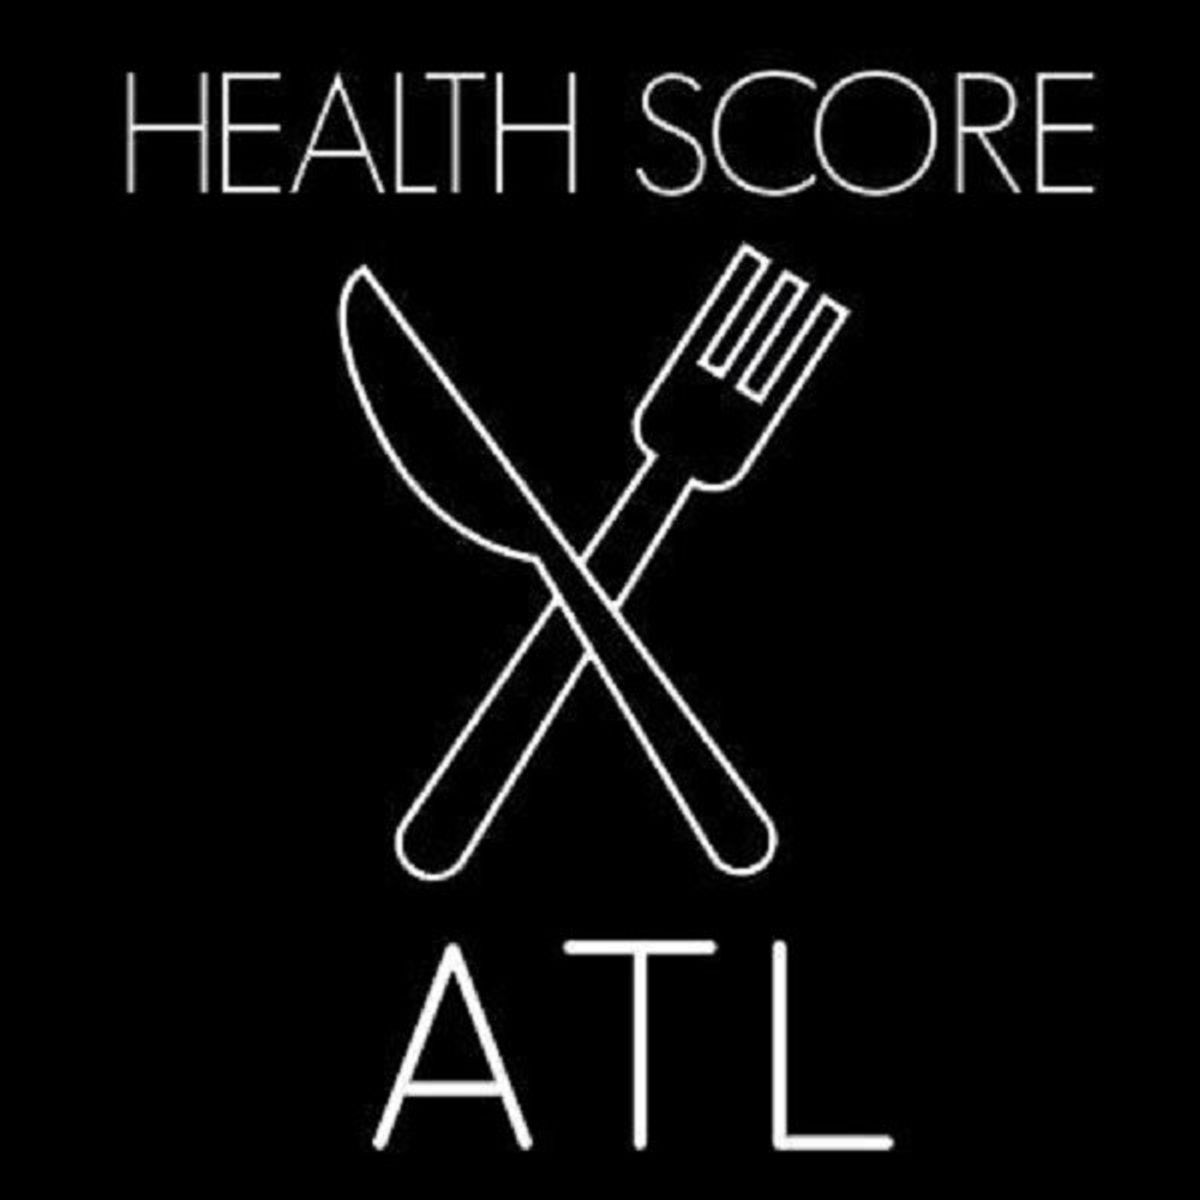 An ode to Health Score ATL and the daily health inspections from Atlanta restaurants.